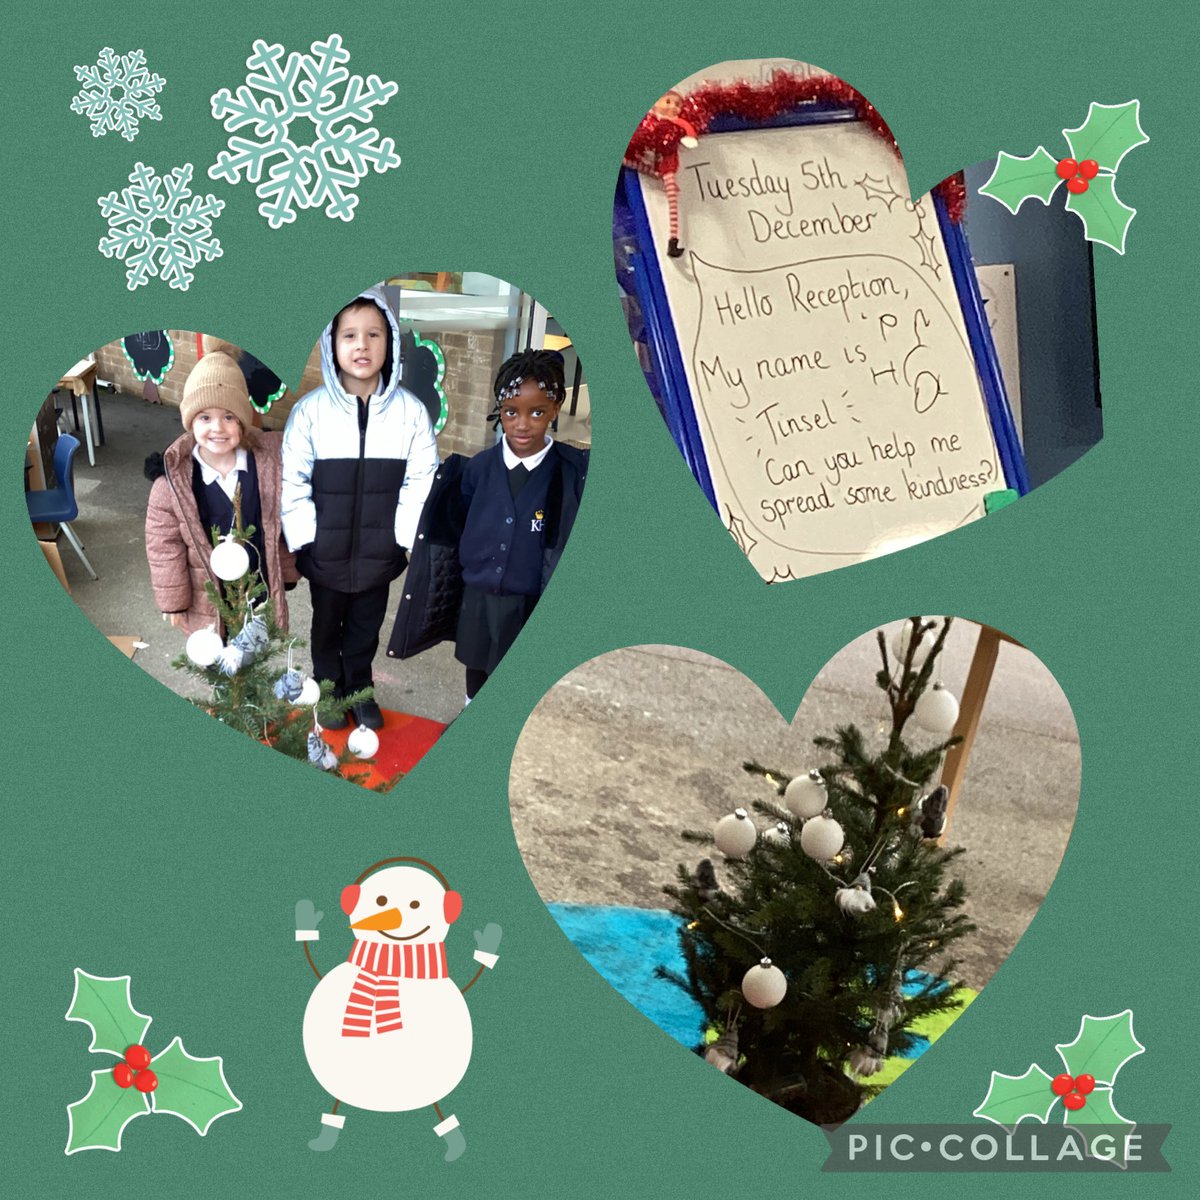 Christmas arrived in Reception today. There’s a little tree to decorate and a cheeky little elf hoping to spread some kindness across the class 🎄@KingsHeathPri @d_khpa @jbadgerjones